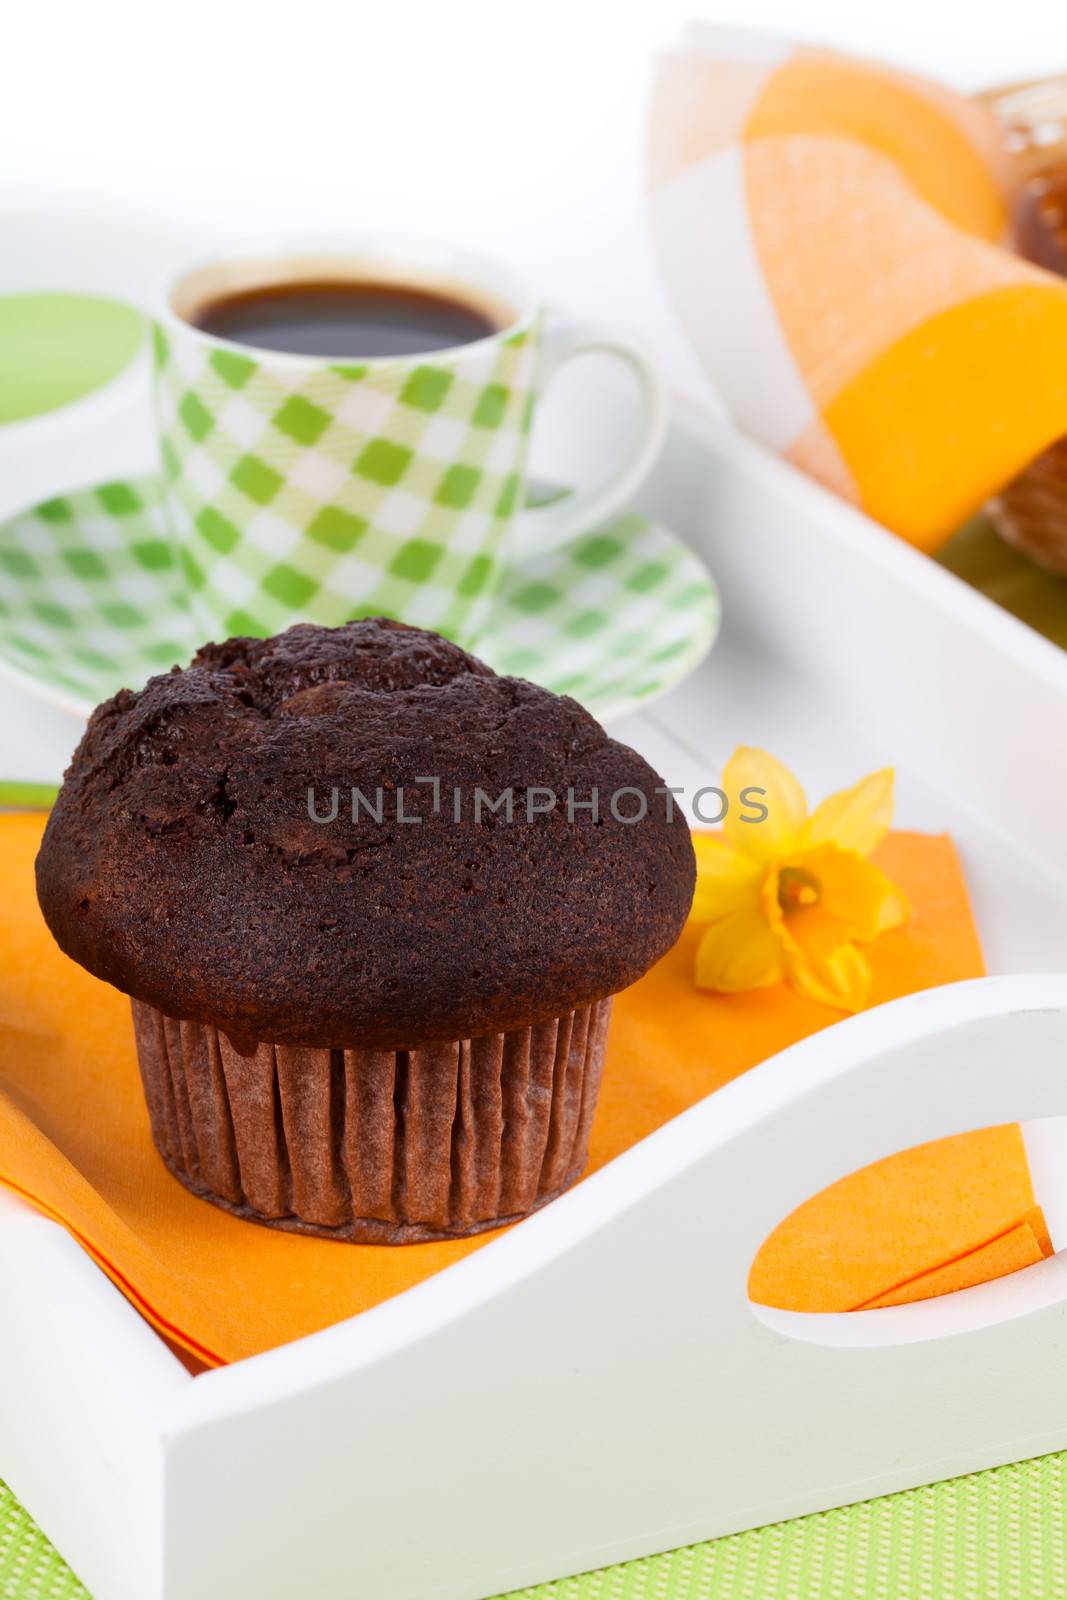 muffin with coffee cup, for breakfast by motorolka